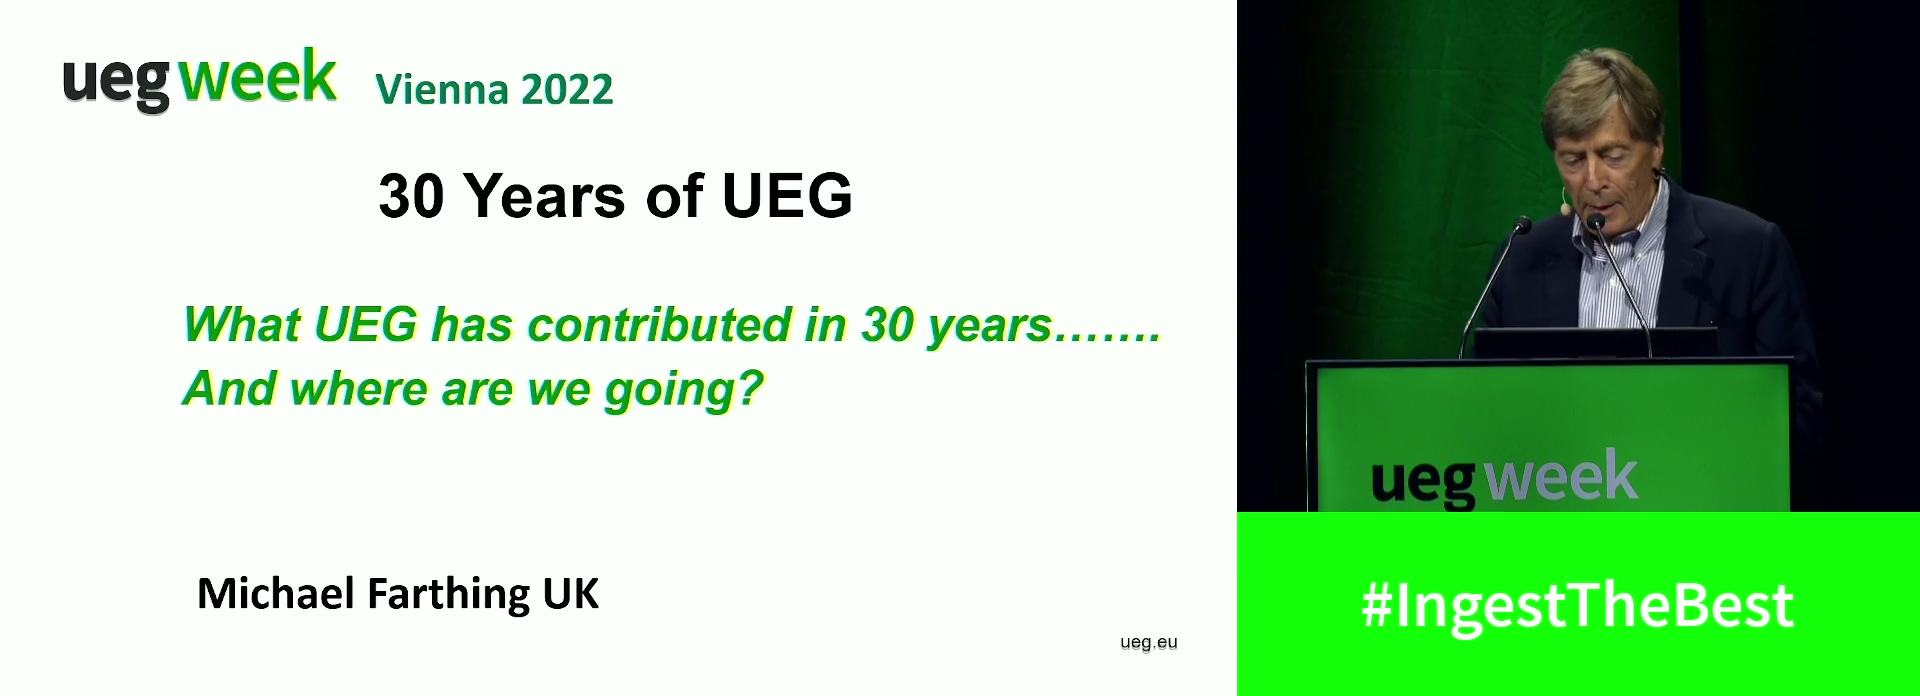 What UEG contributed in 30 years and where we are going